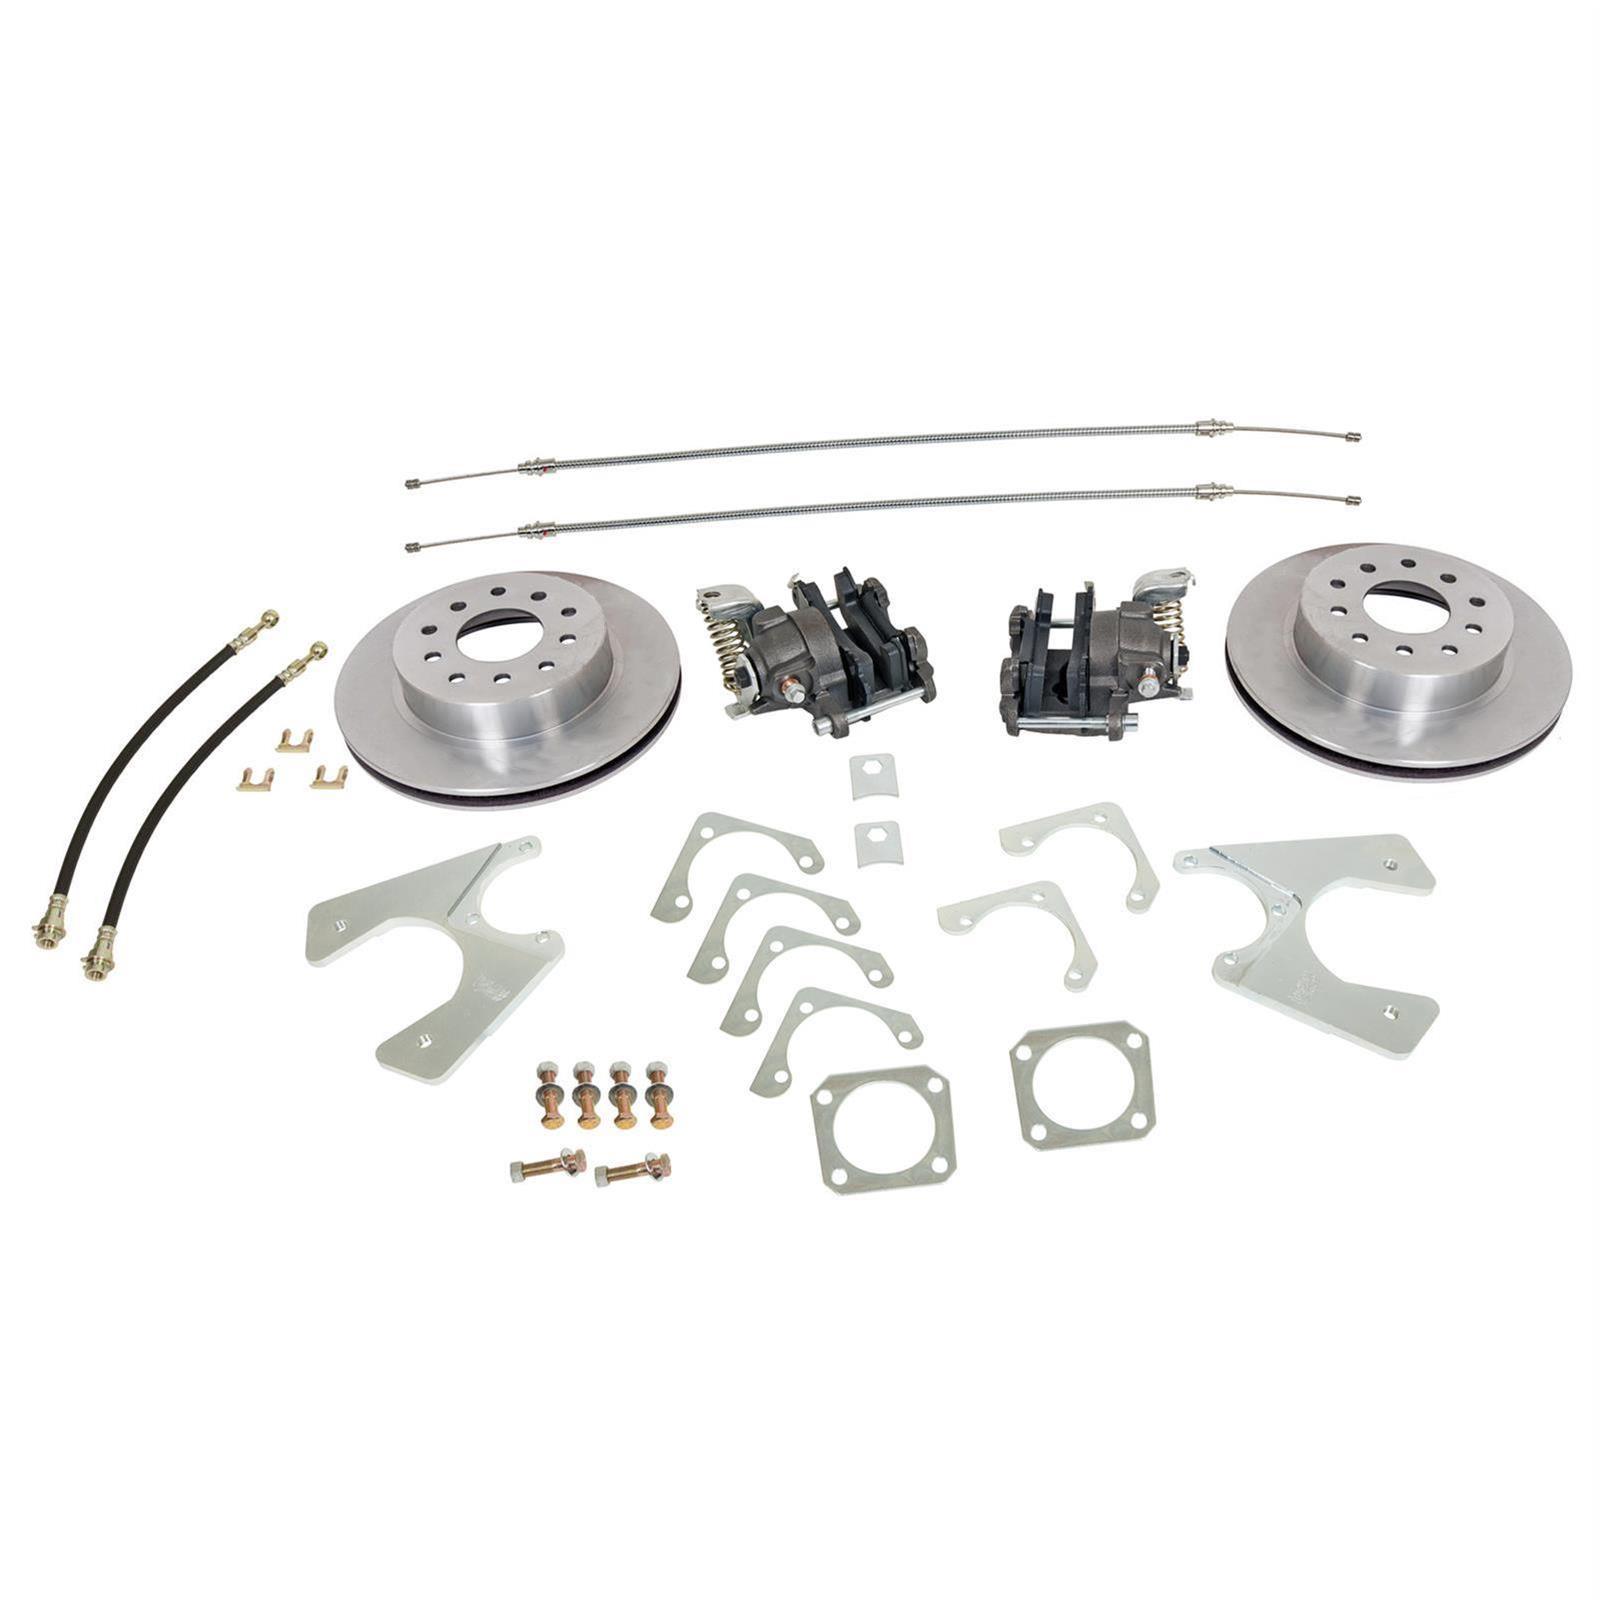 Brake Conversion Kit for 1976 second generation Ford Mustang